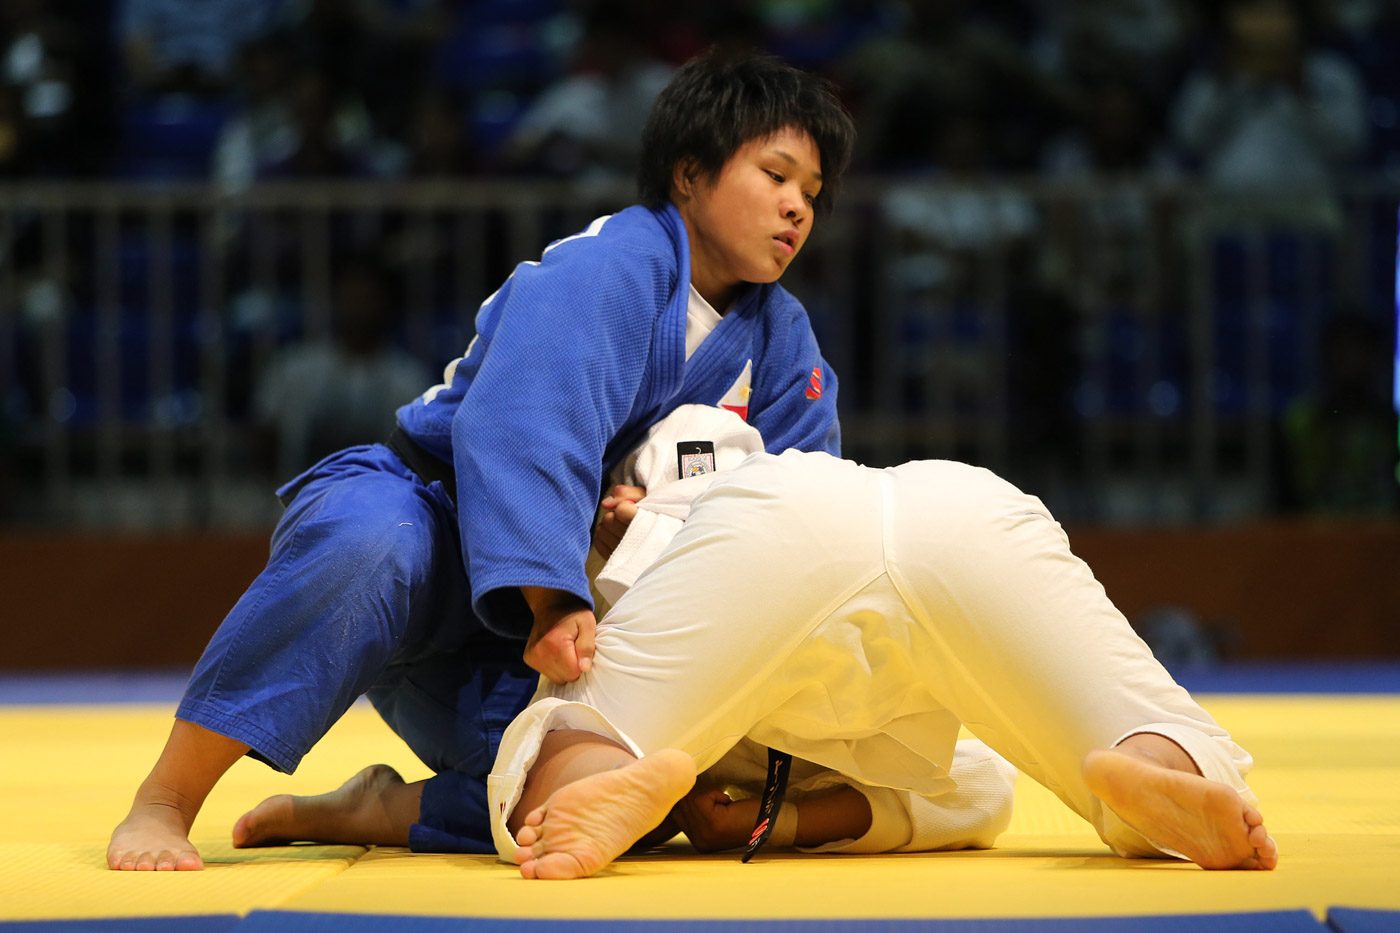 Mariya Takahashi of the Philippines competes against Surattana Thongsri of Thailand in the finals of the women's -70kg class of the 29th Southeast Asian Games judo competition at the Kuala Lumpur Convention Center Hall 5. Takahashi prevailed via ippon in 48 seconds to win the gold medal. Photo from PSC-POC Media 